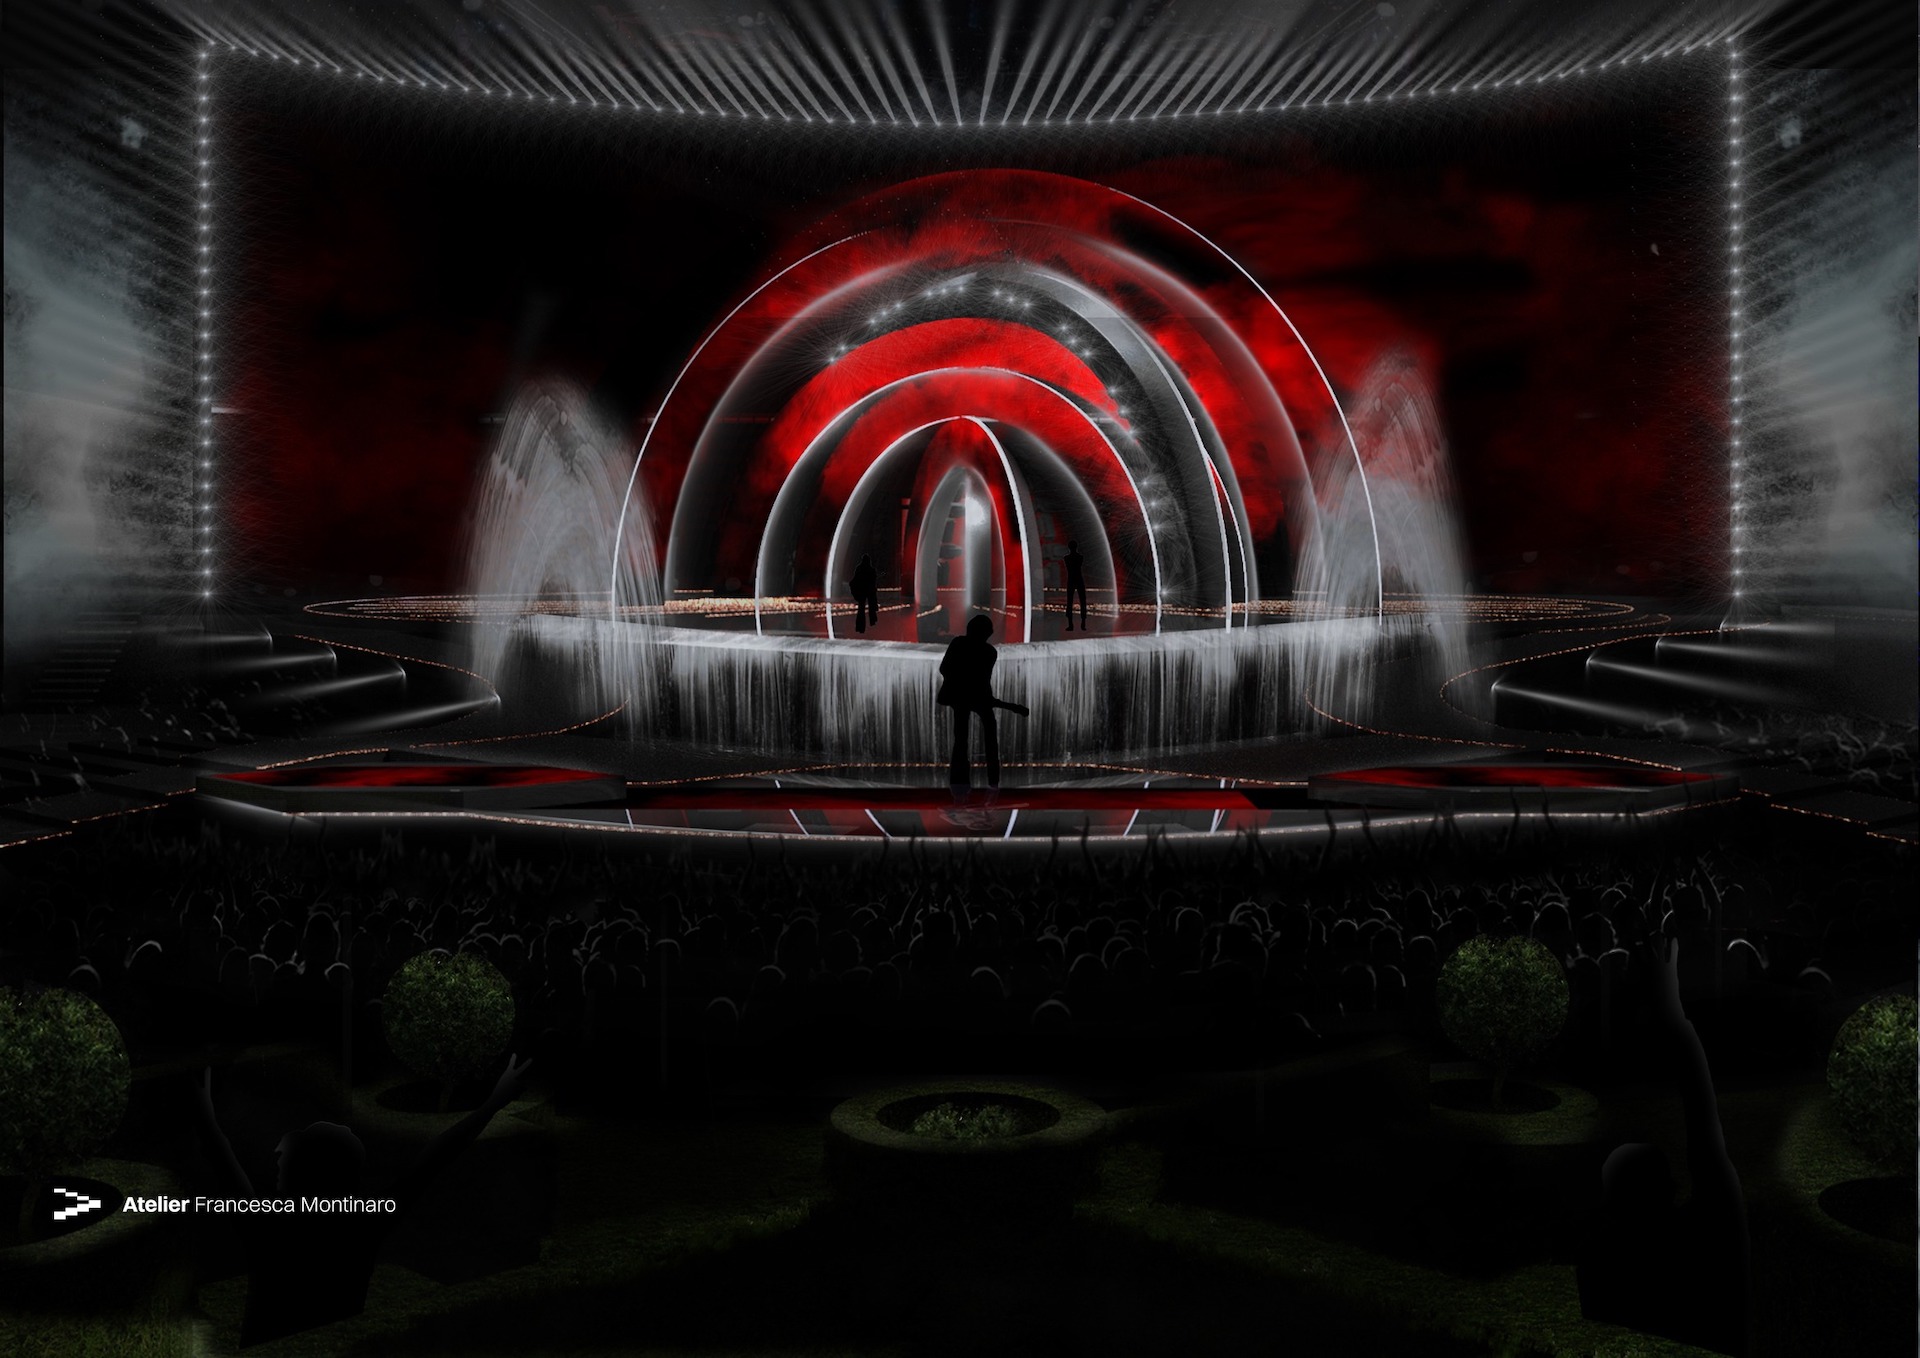 Eurovision Song Contest 2022 stage